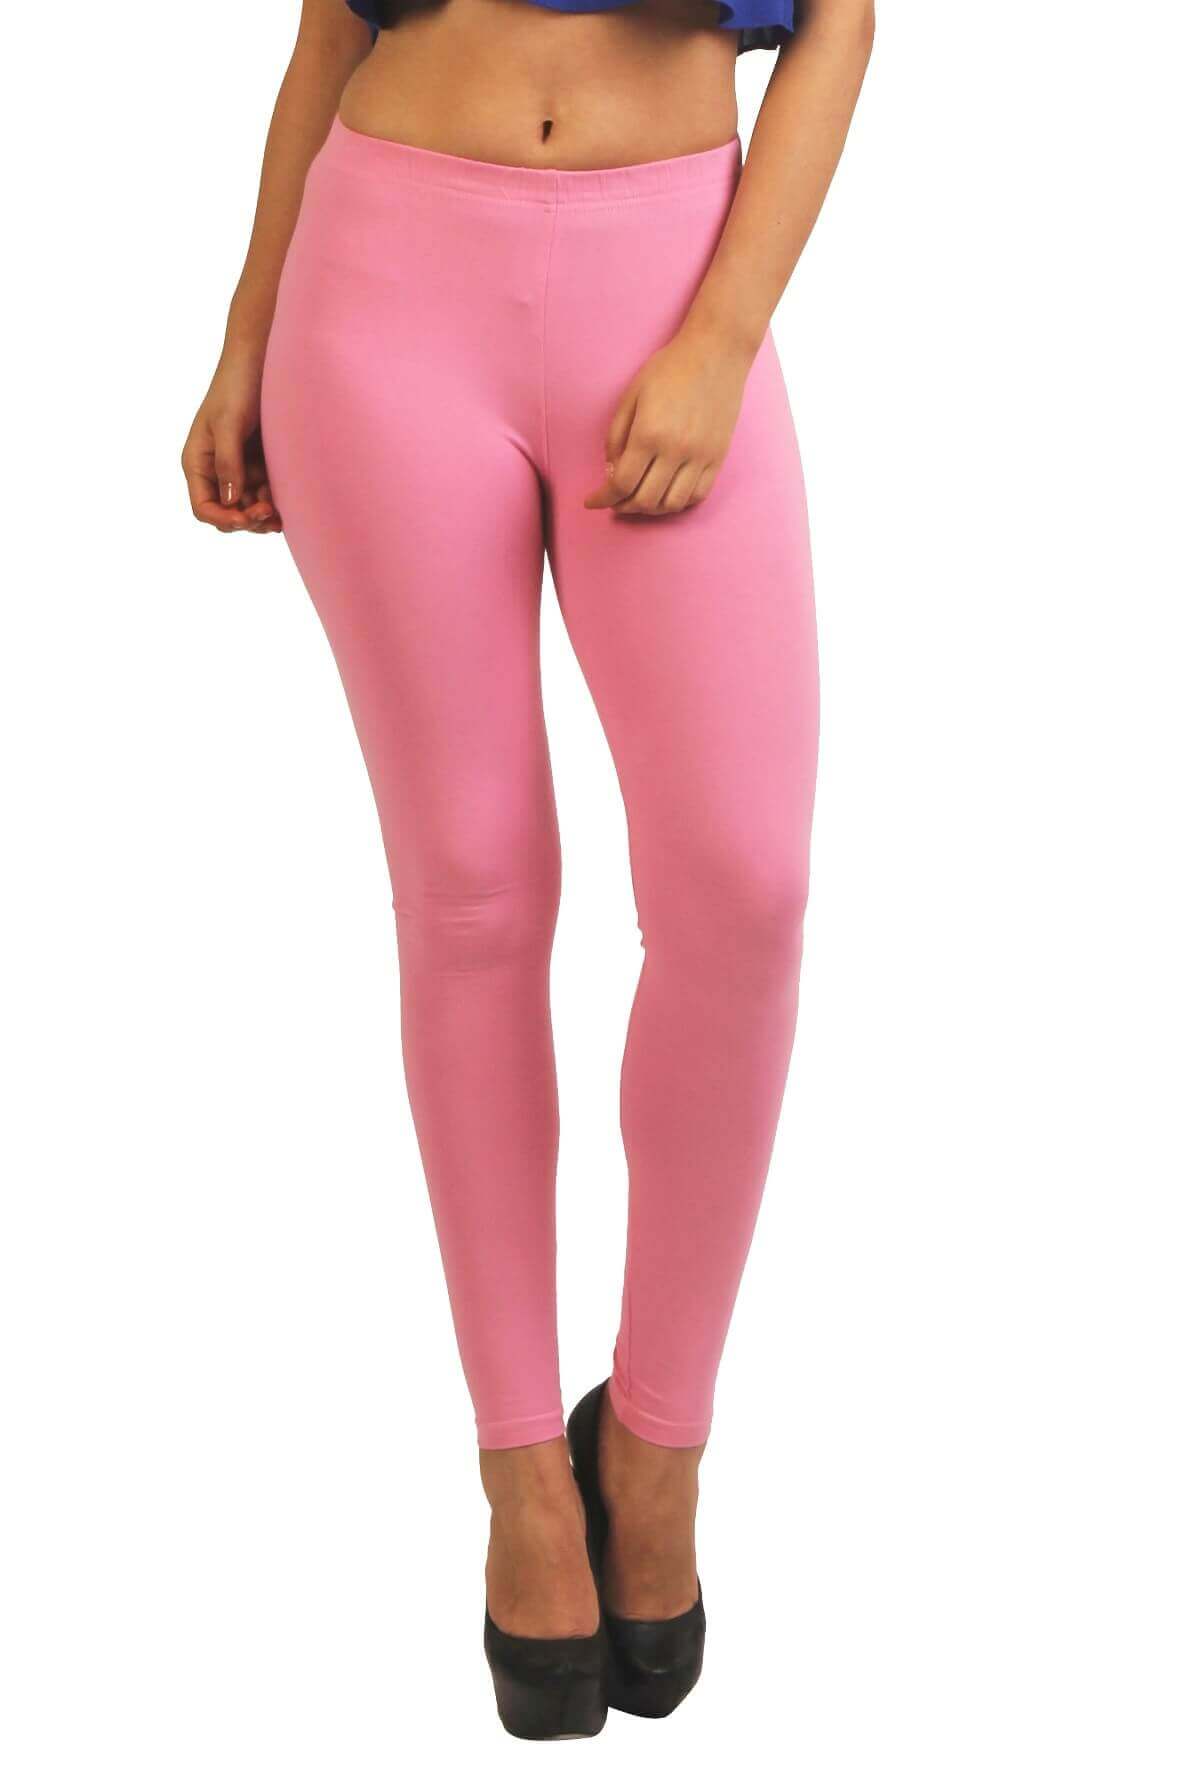 https://frenchtrendz.com/images/thumbs/0000319_frenchtrendz-cotton-spandex-baby-pink-ankle-leggings.jpeg